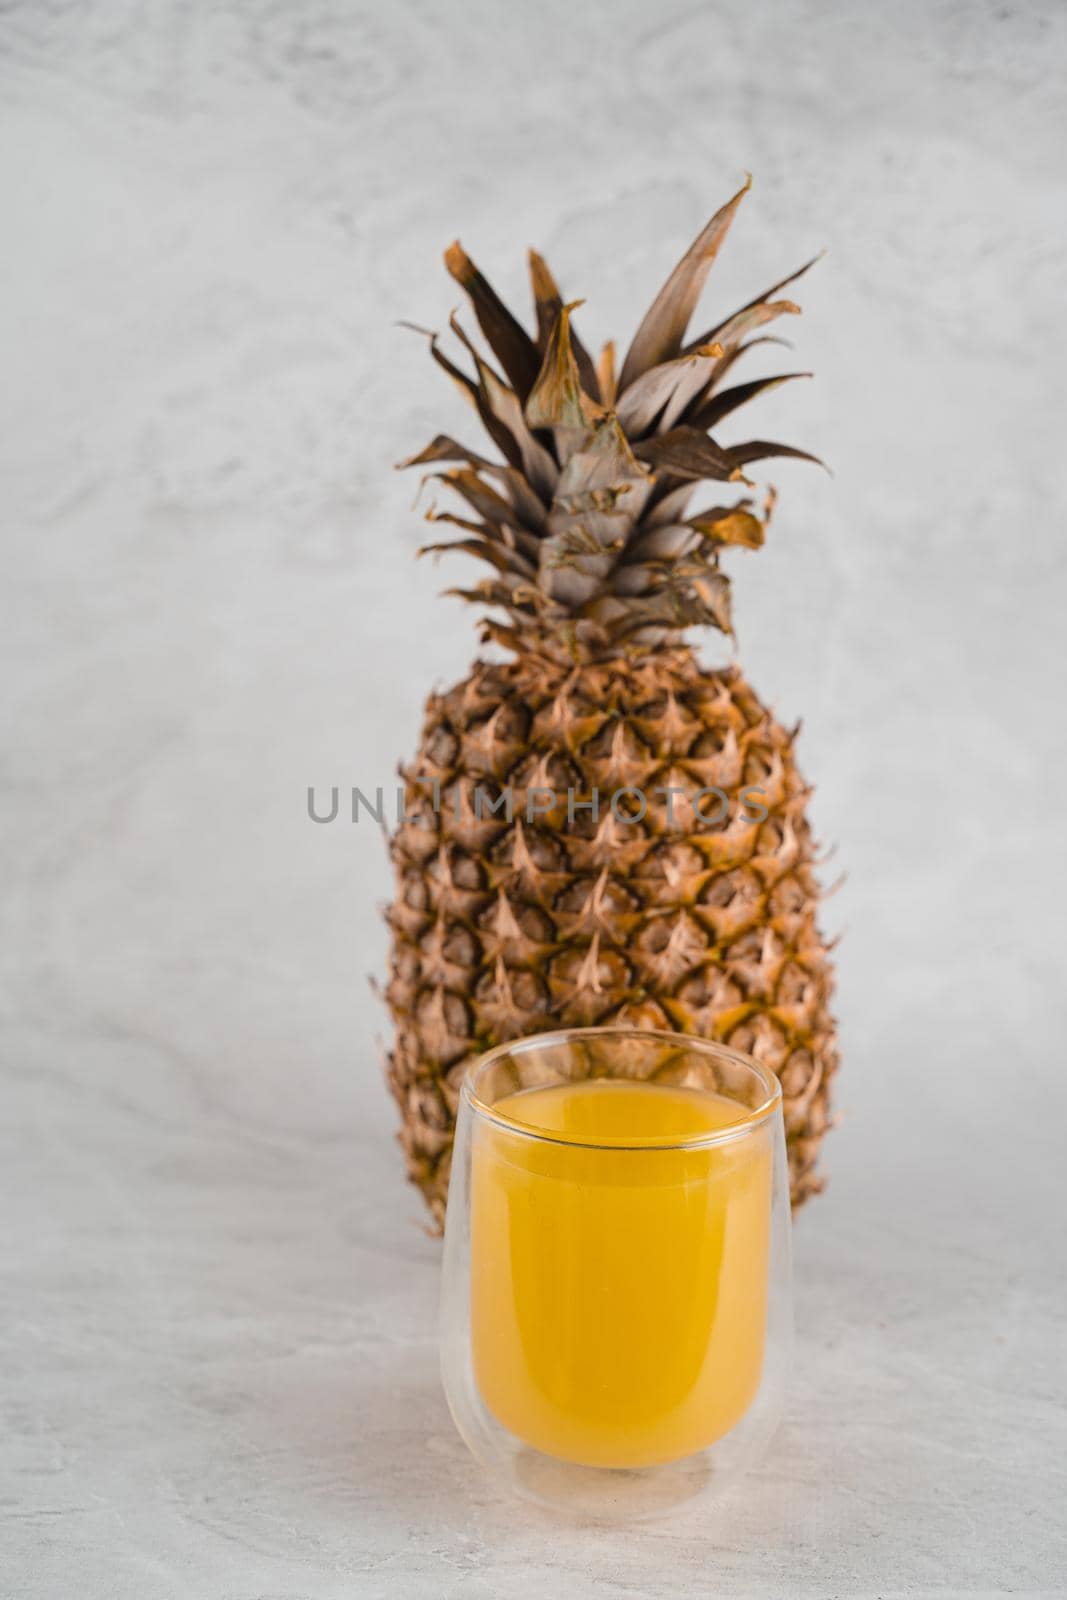 Pineapple fruit and juice in double glass cup on white stone background. Tropical fruit Pouring yellow tropical juice into glass.